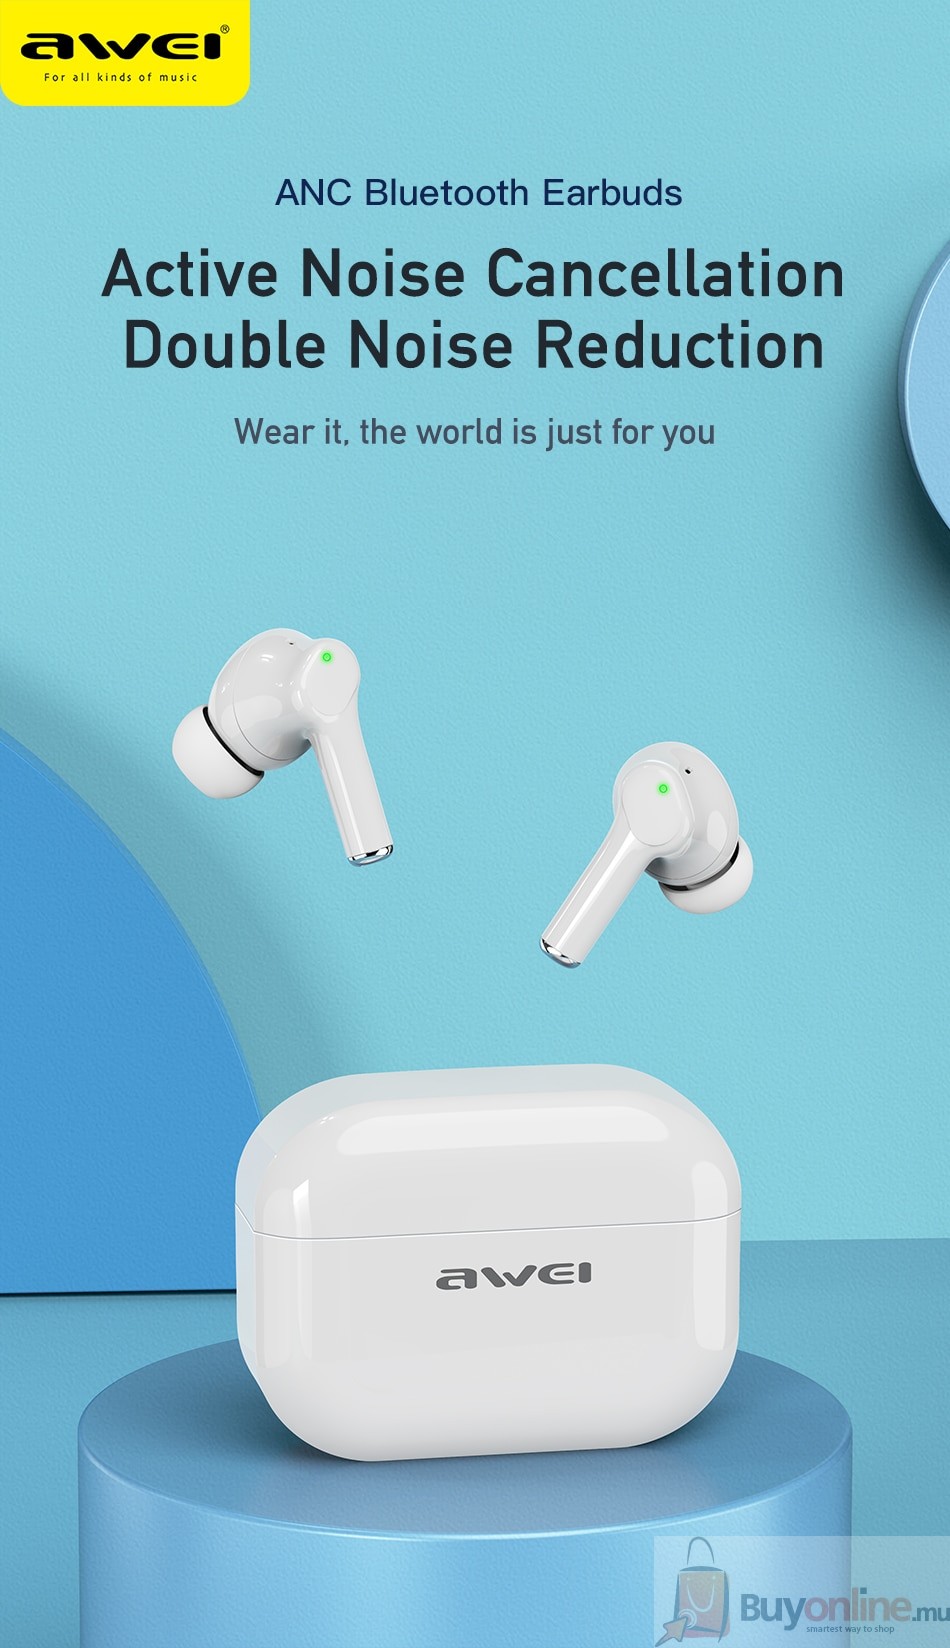 image 2022 06 11 215622605 - AWEI TA1 TWS Wireless 5.0 ANC Earbuds Noise Reduction HD Stereo ENC Clear Call Sound Handsfree Quick Charge type-C For iPhone - BuyOnline.mu - AWEI TA1, TWS Wireless